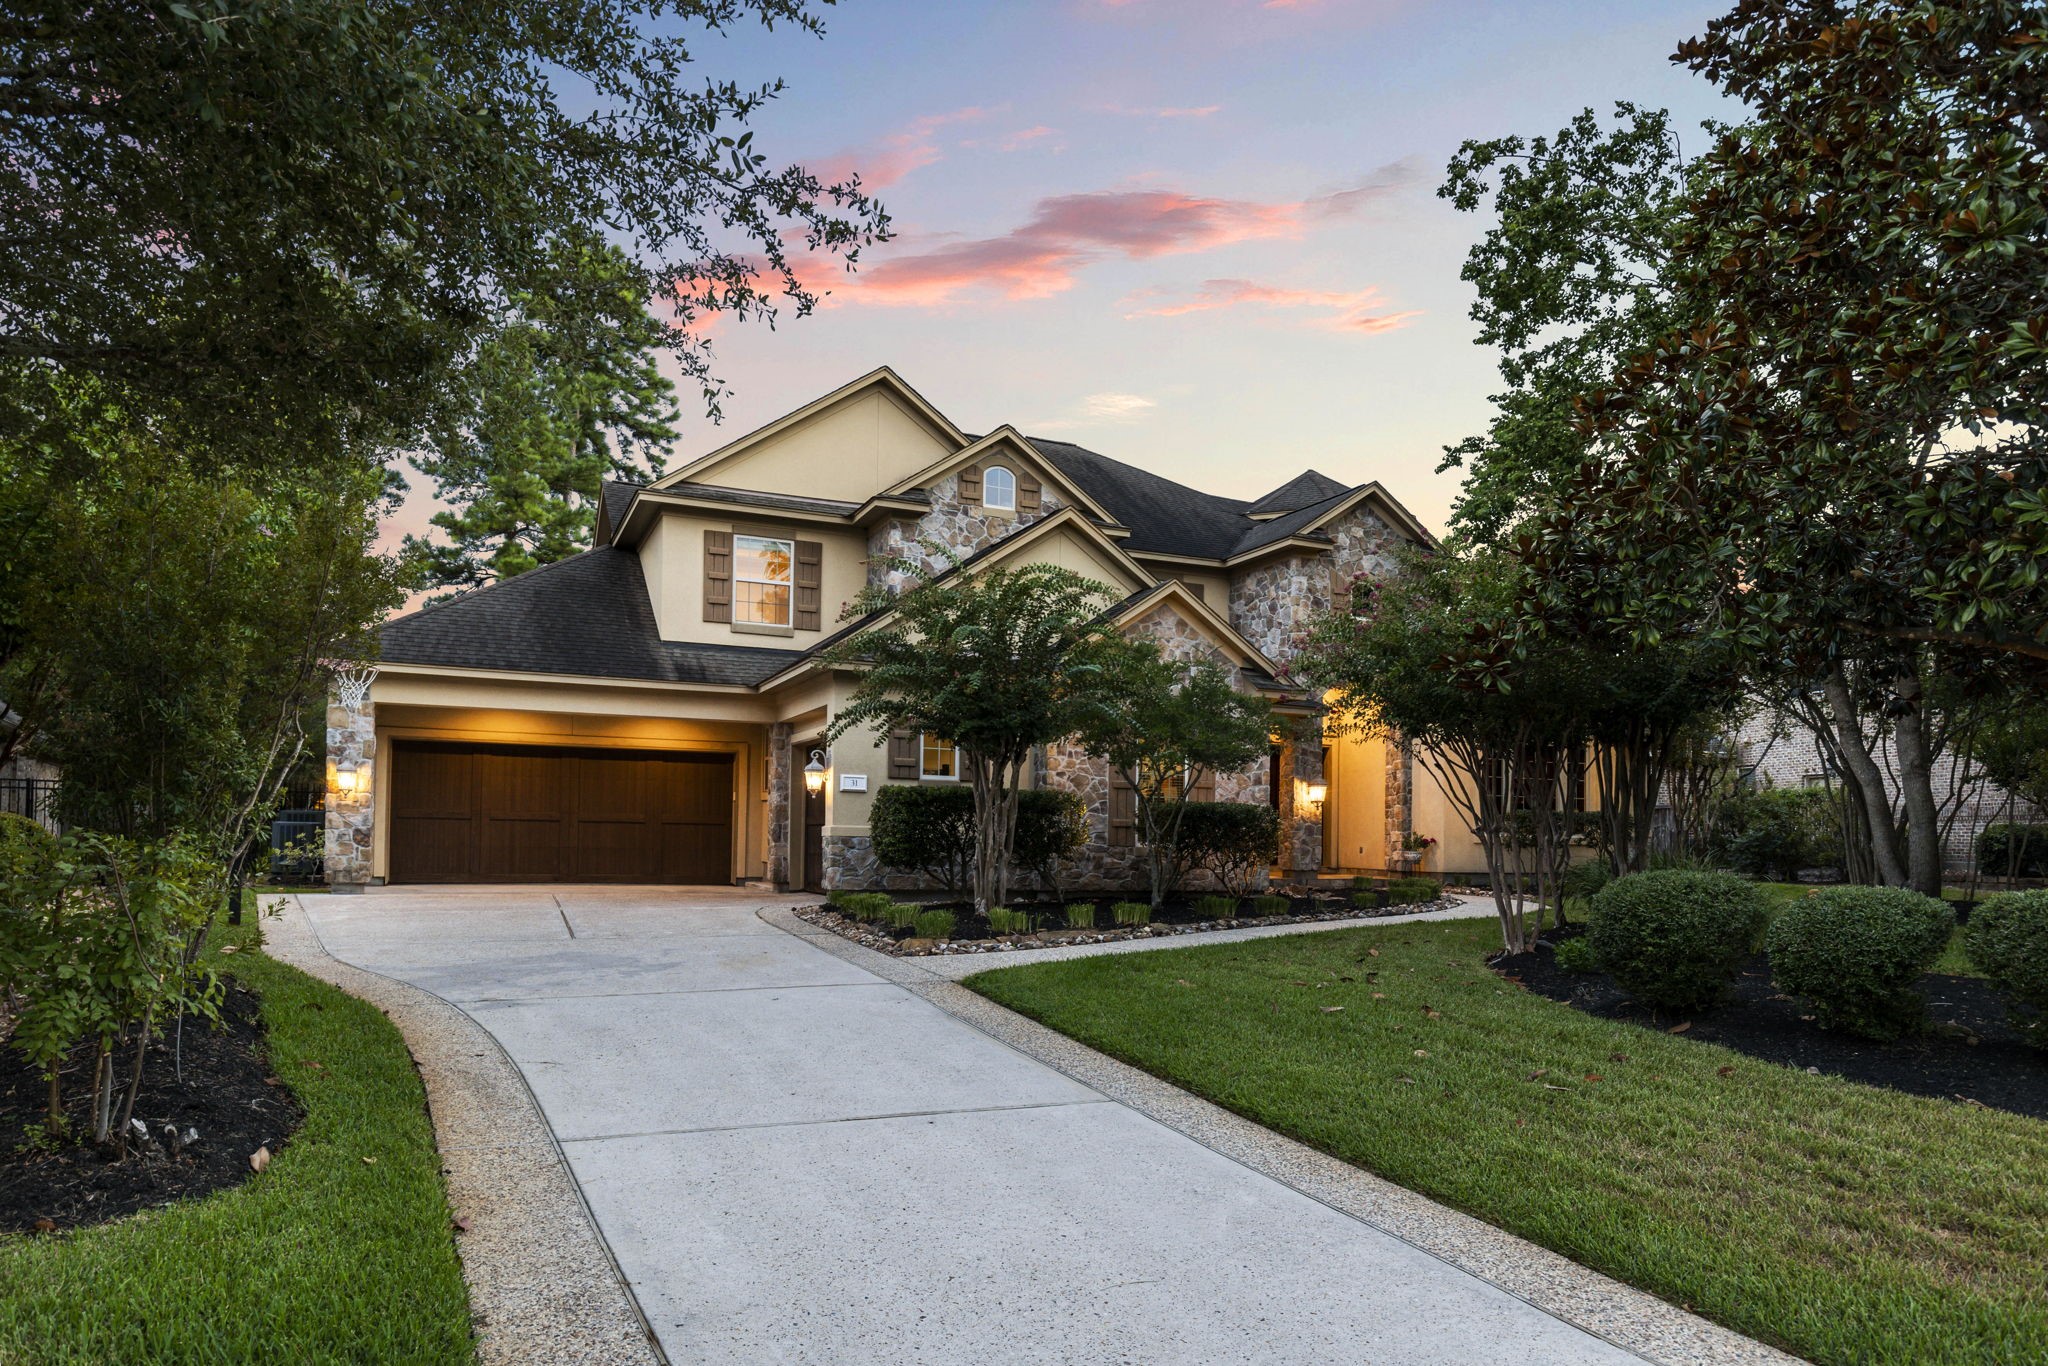 This 5 bedroom, 4.5 bath home has wonderful curb appeal with a blend of stucco and stone finishes, exceptional craftmanship and meticulous landscaping.